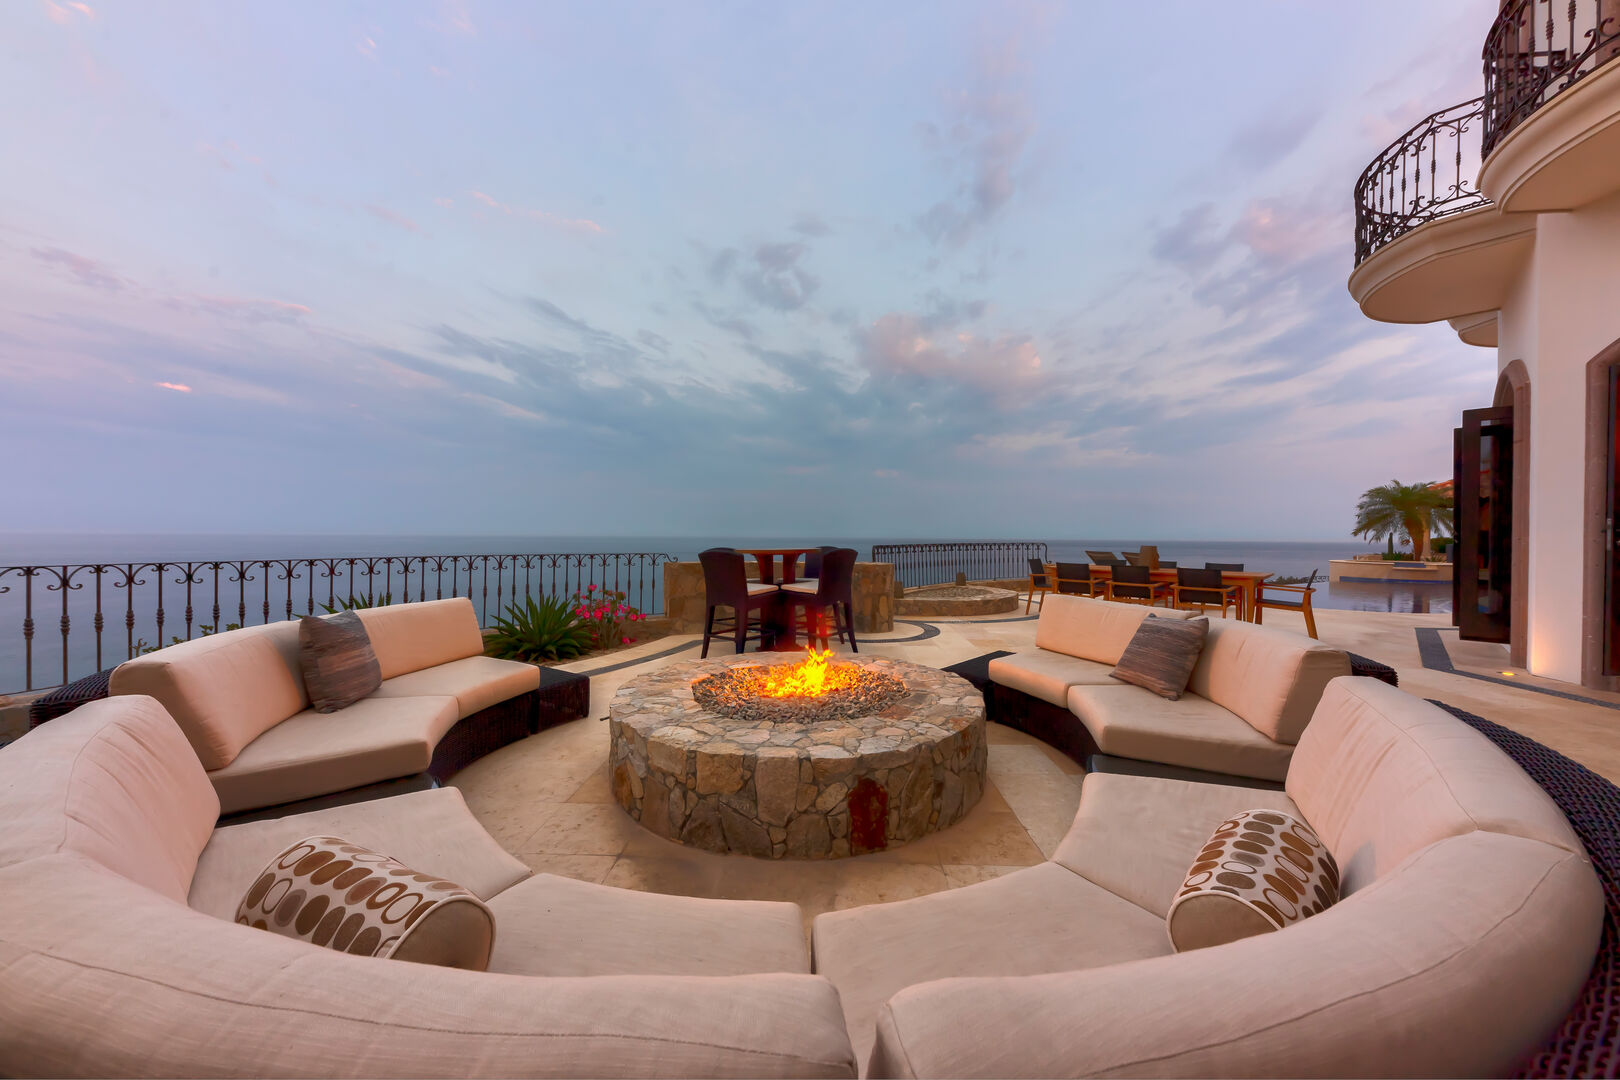 A lit fire pit surrounded by chairs at Hacienda 502